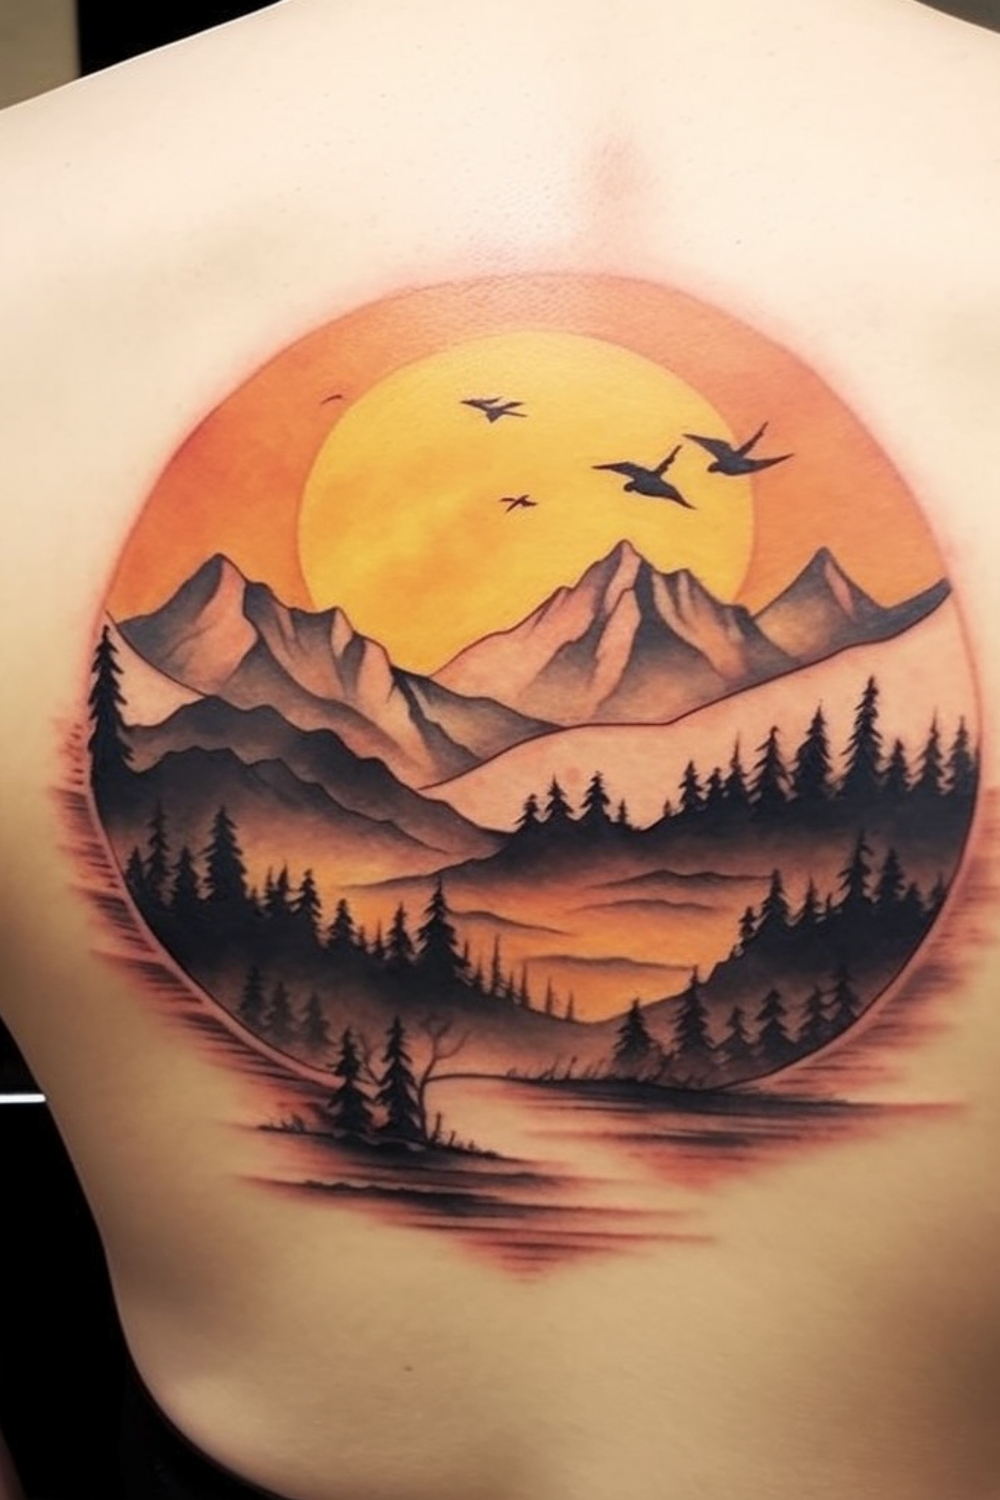 Best Mountain Tattoo Designs And Ideas | Tattoos for guys, Forearm tattoos,  Tattoos